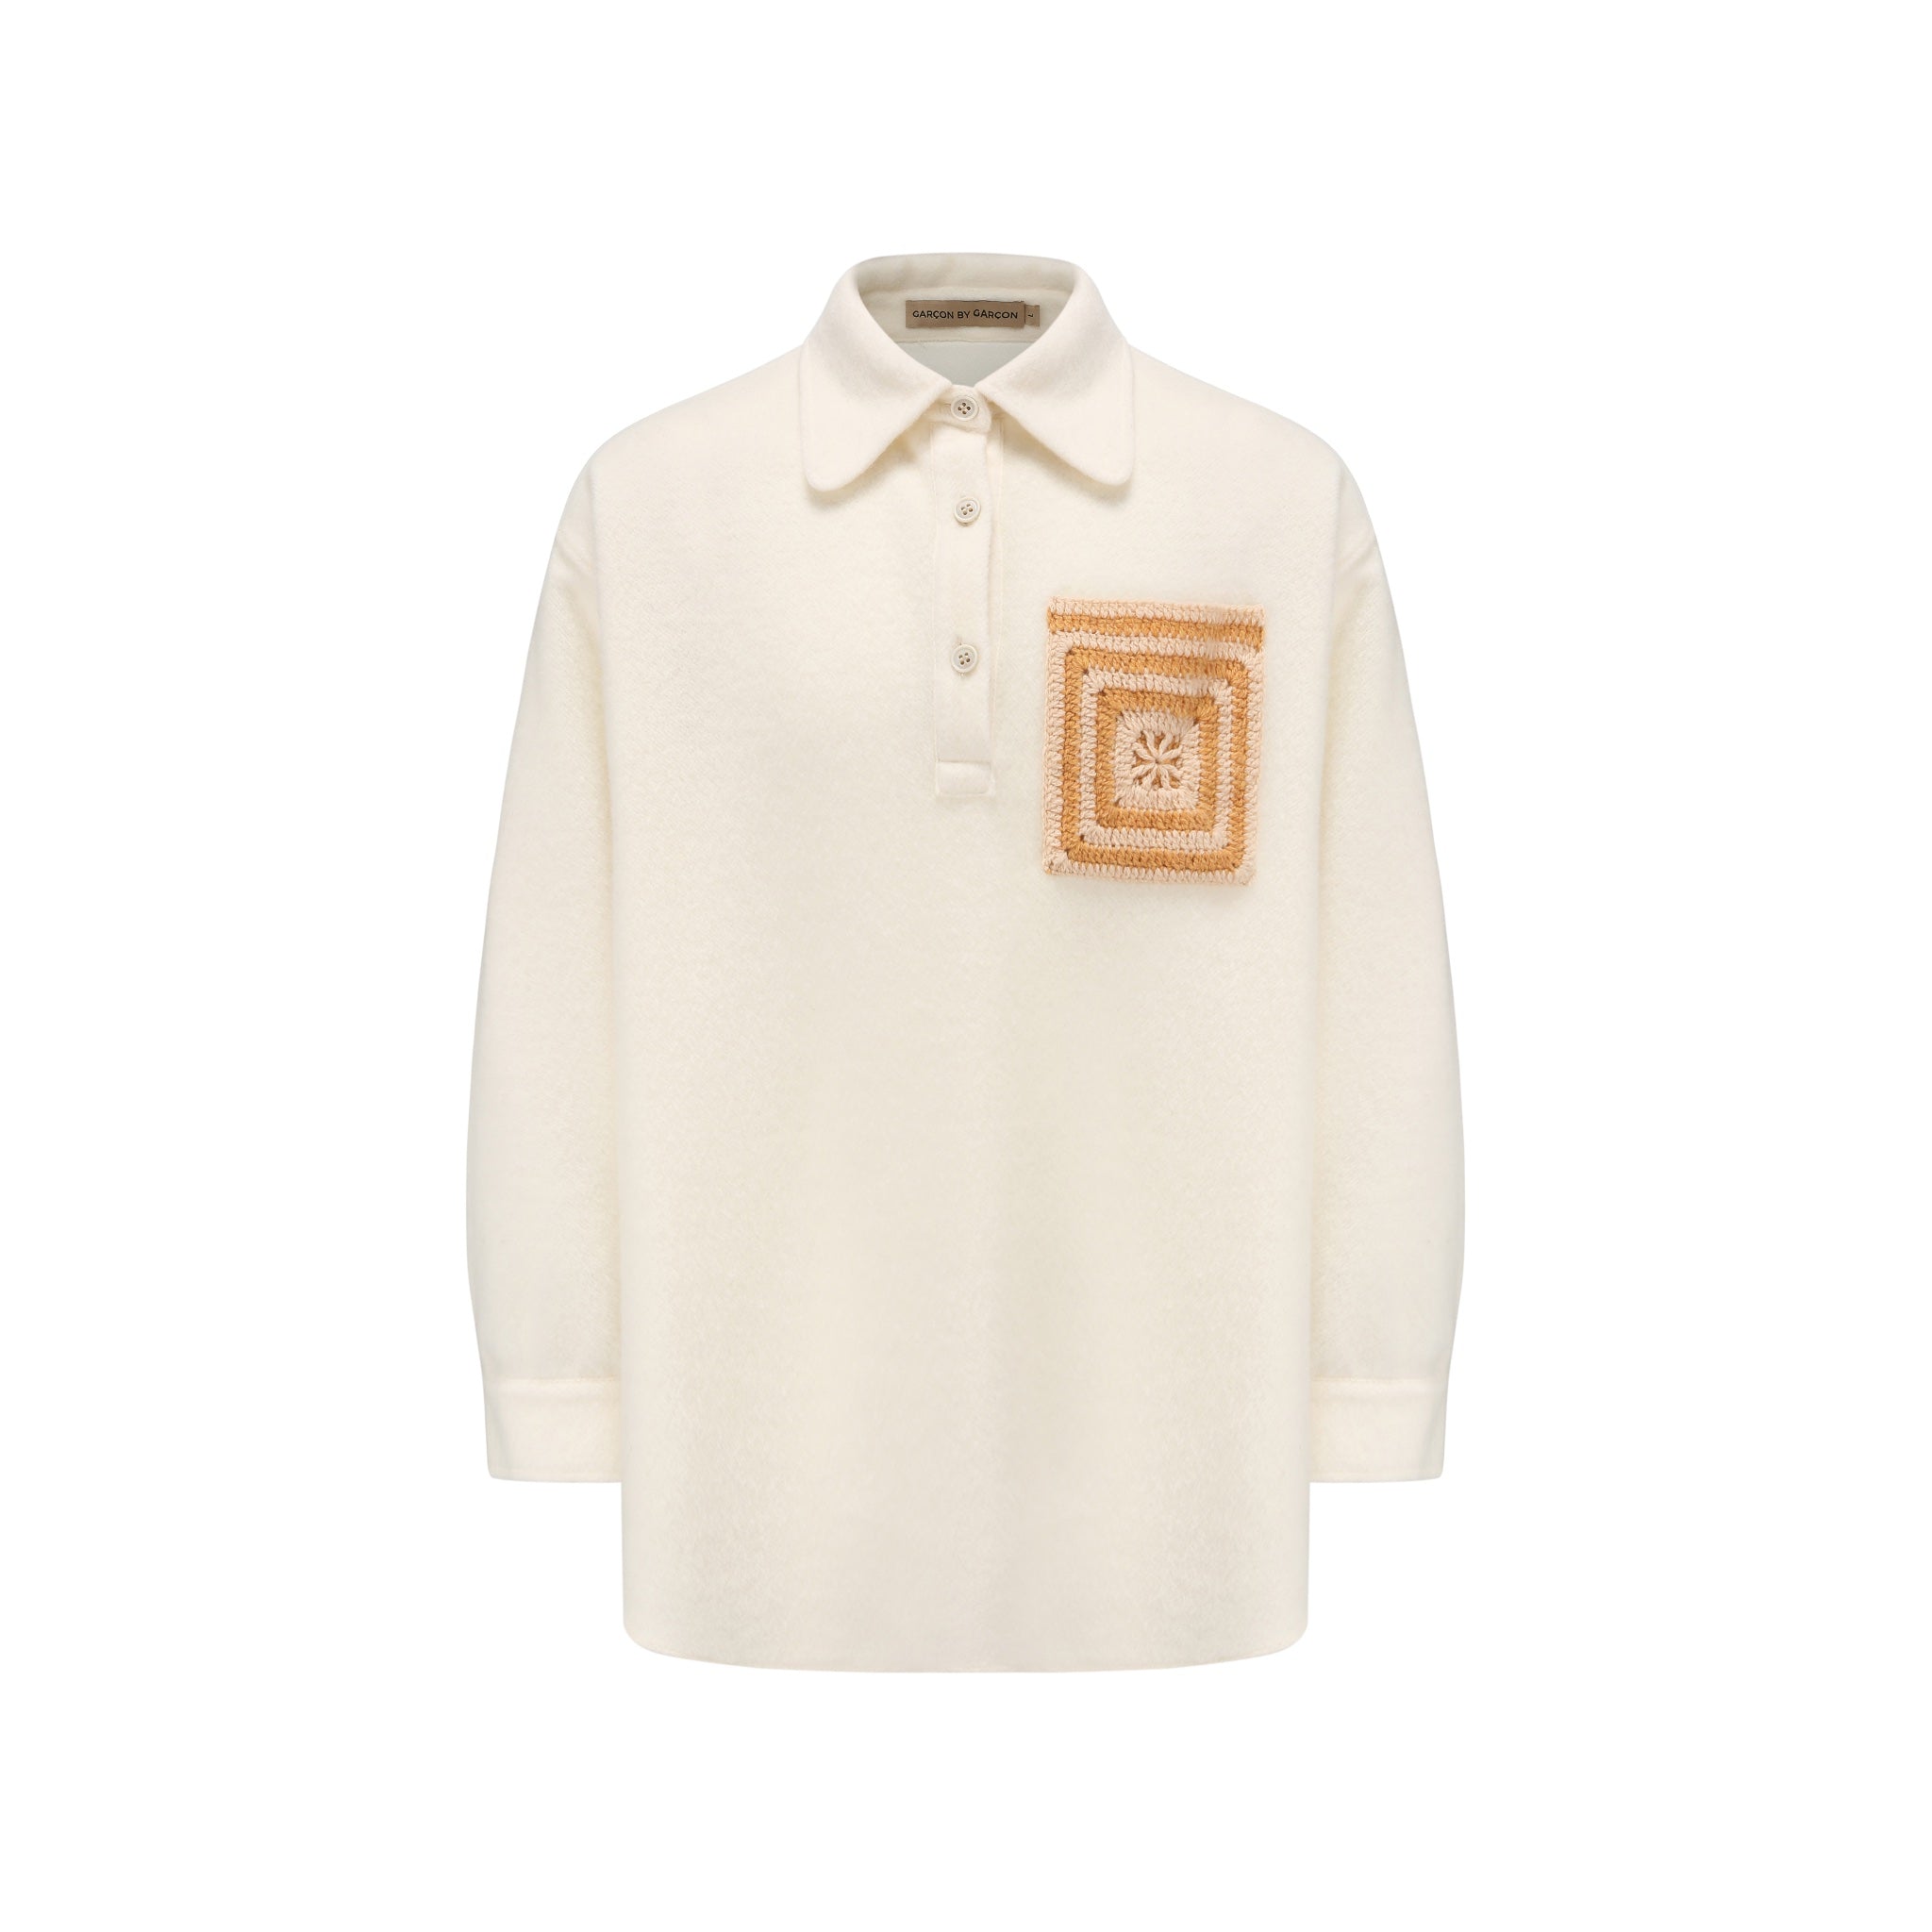 GARCON BY GARCON Hand Hook Pocket Trim Soft Wool POLO Pullover Shirt White | MADA IN CHINA